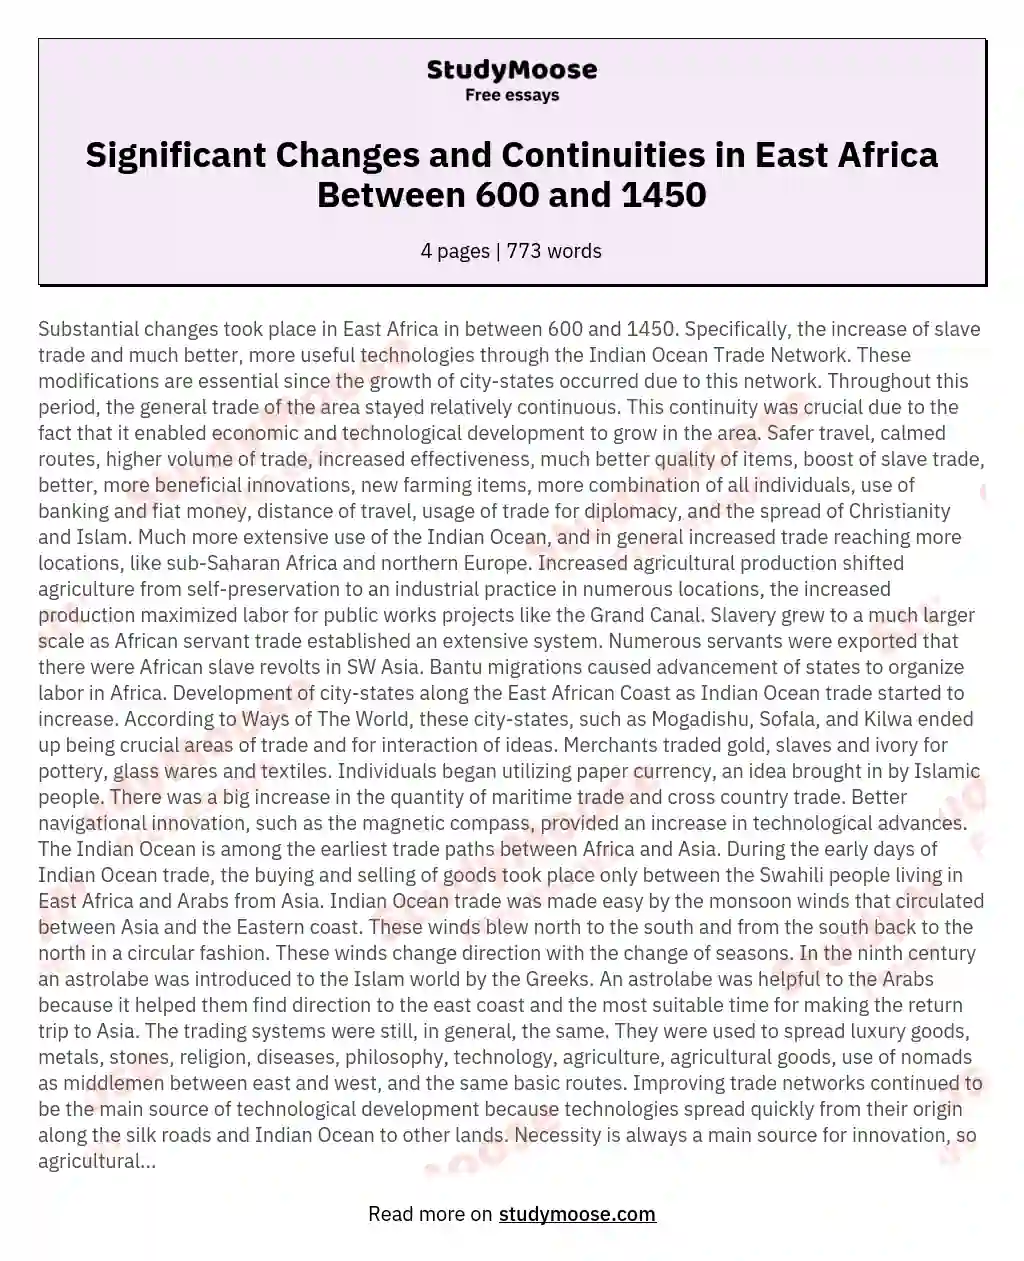 Significant Changes and Continuities in East Africa Between 600 and 1450